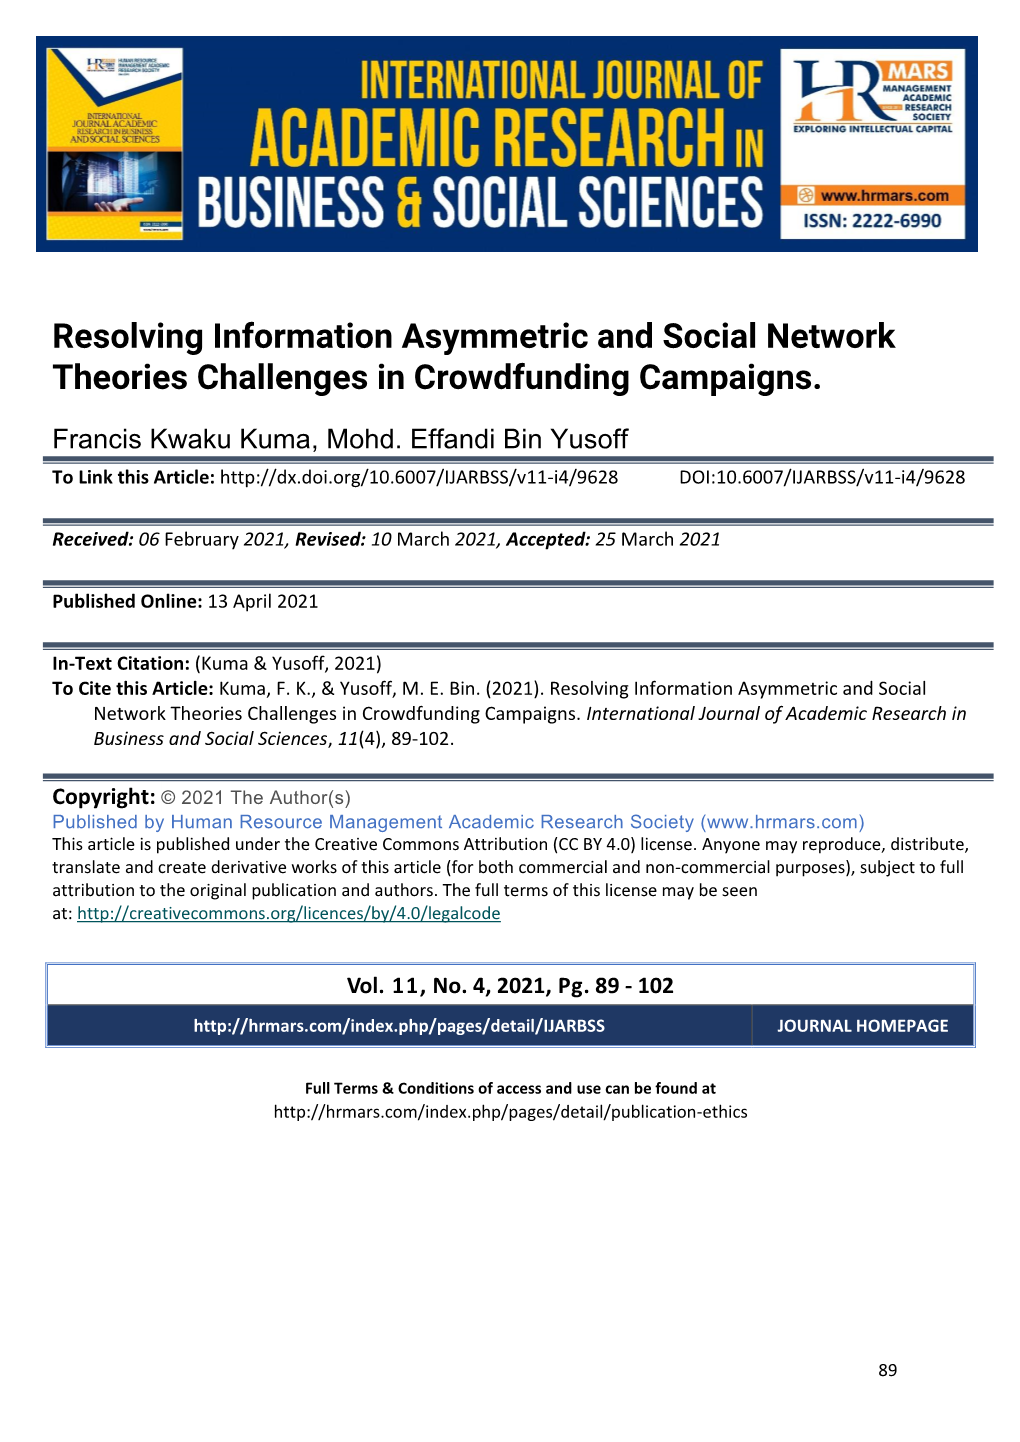 Resolving Information Asymmetric and Social Network Theories Challenges in Crowdfunding Campaigns